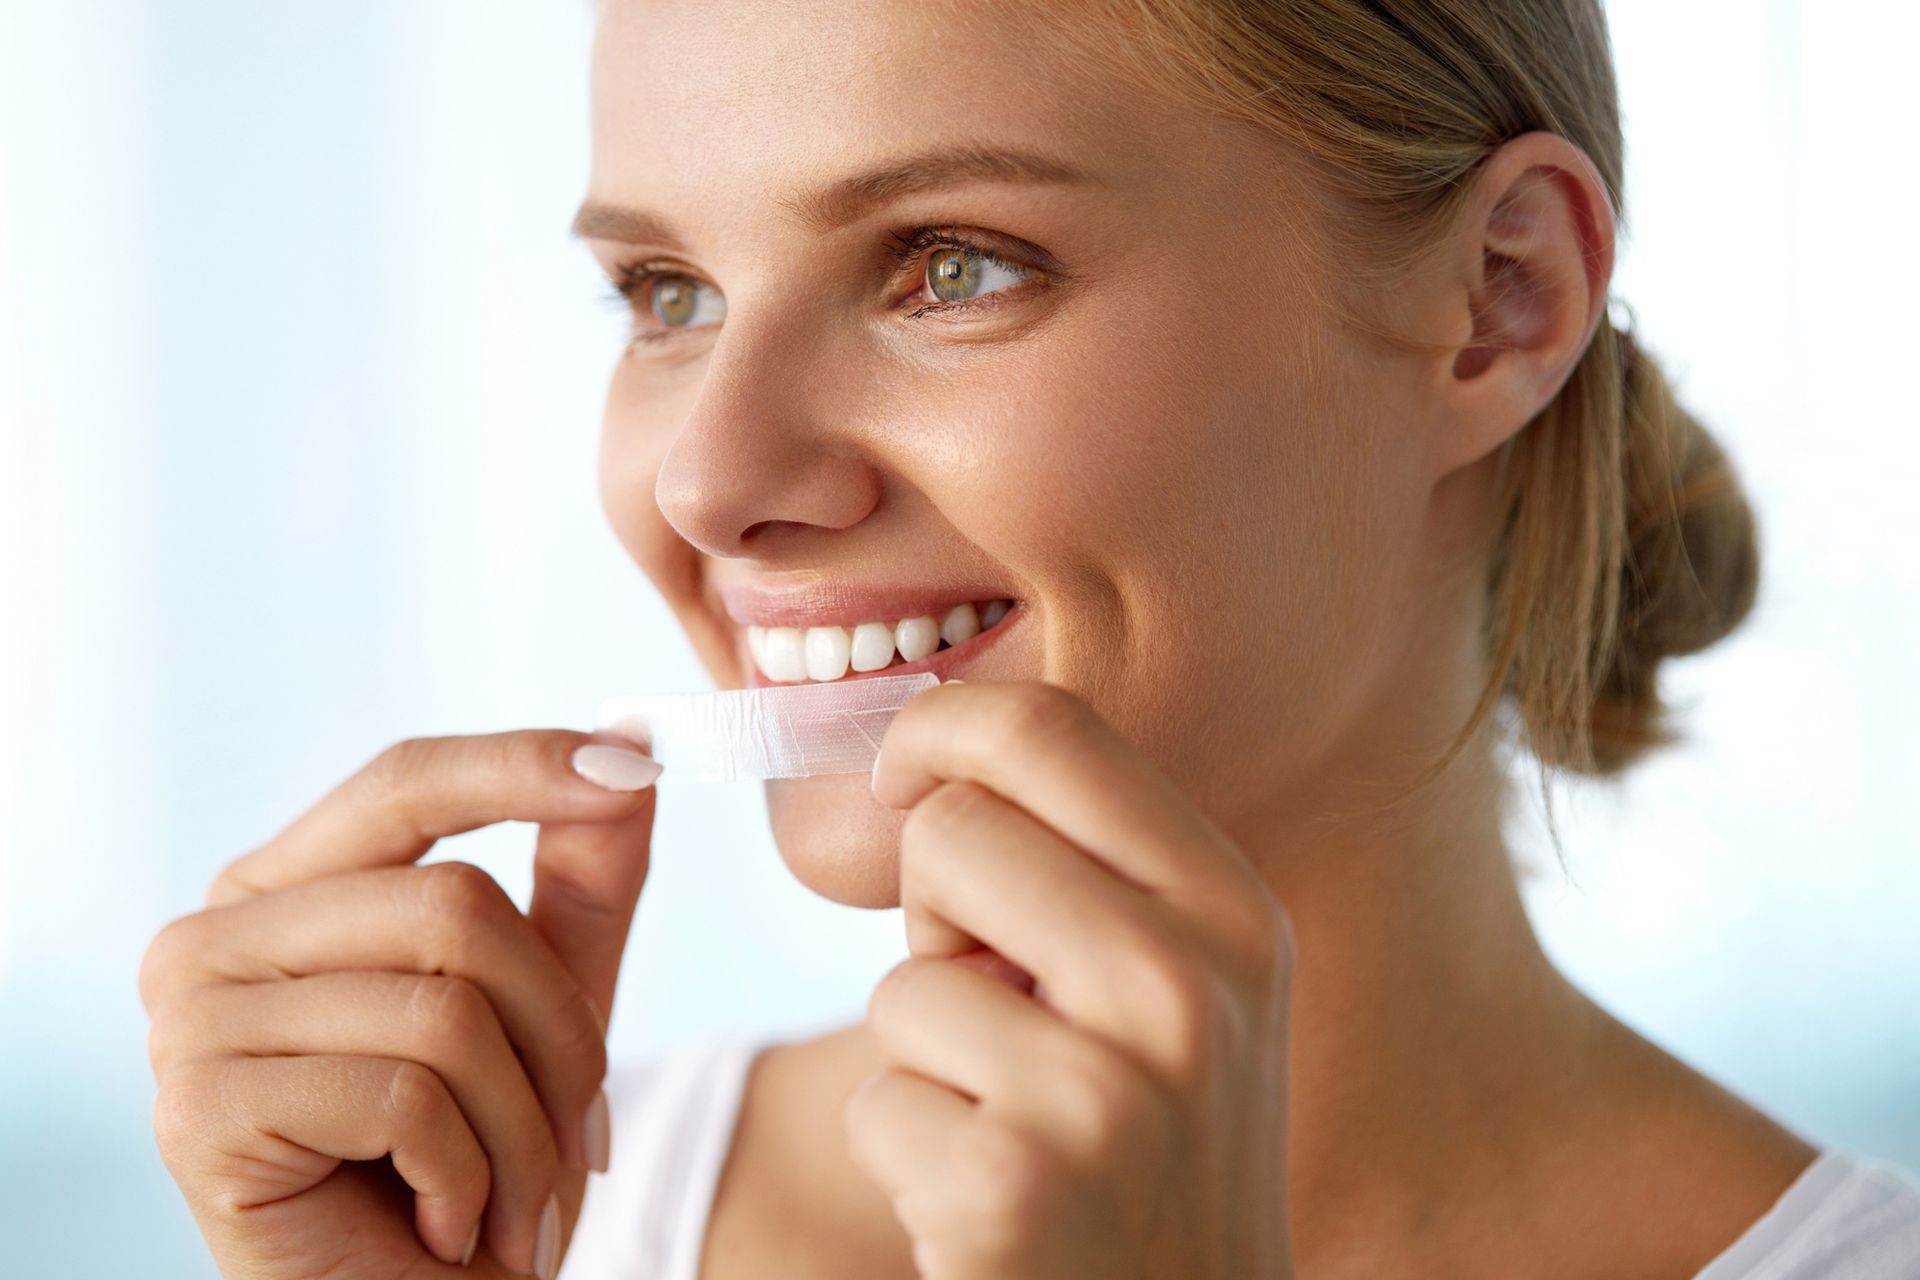 A woman is applying whitening strips to her teeth.